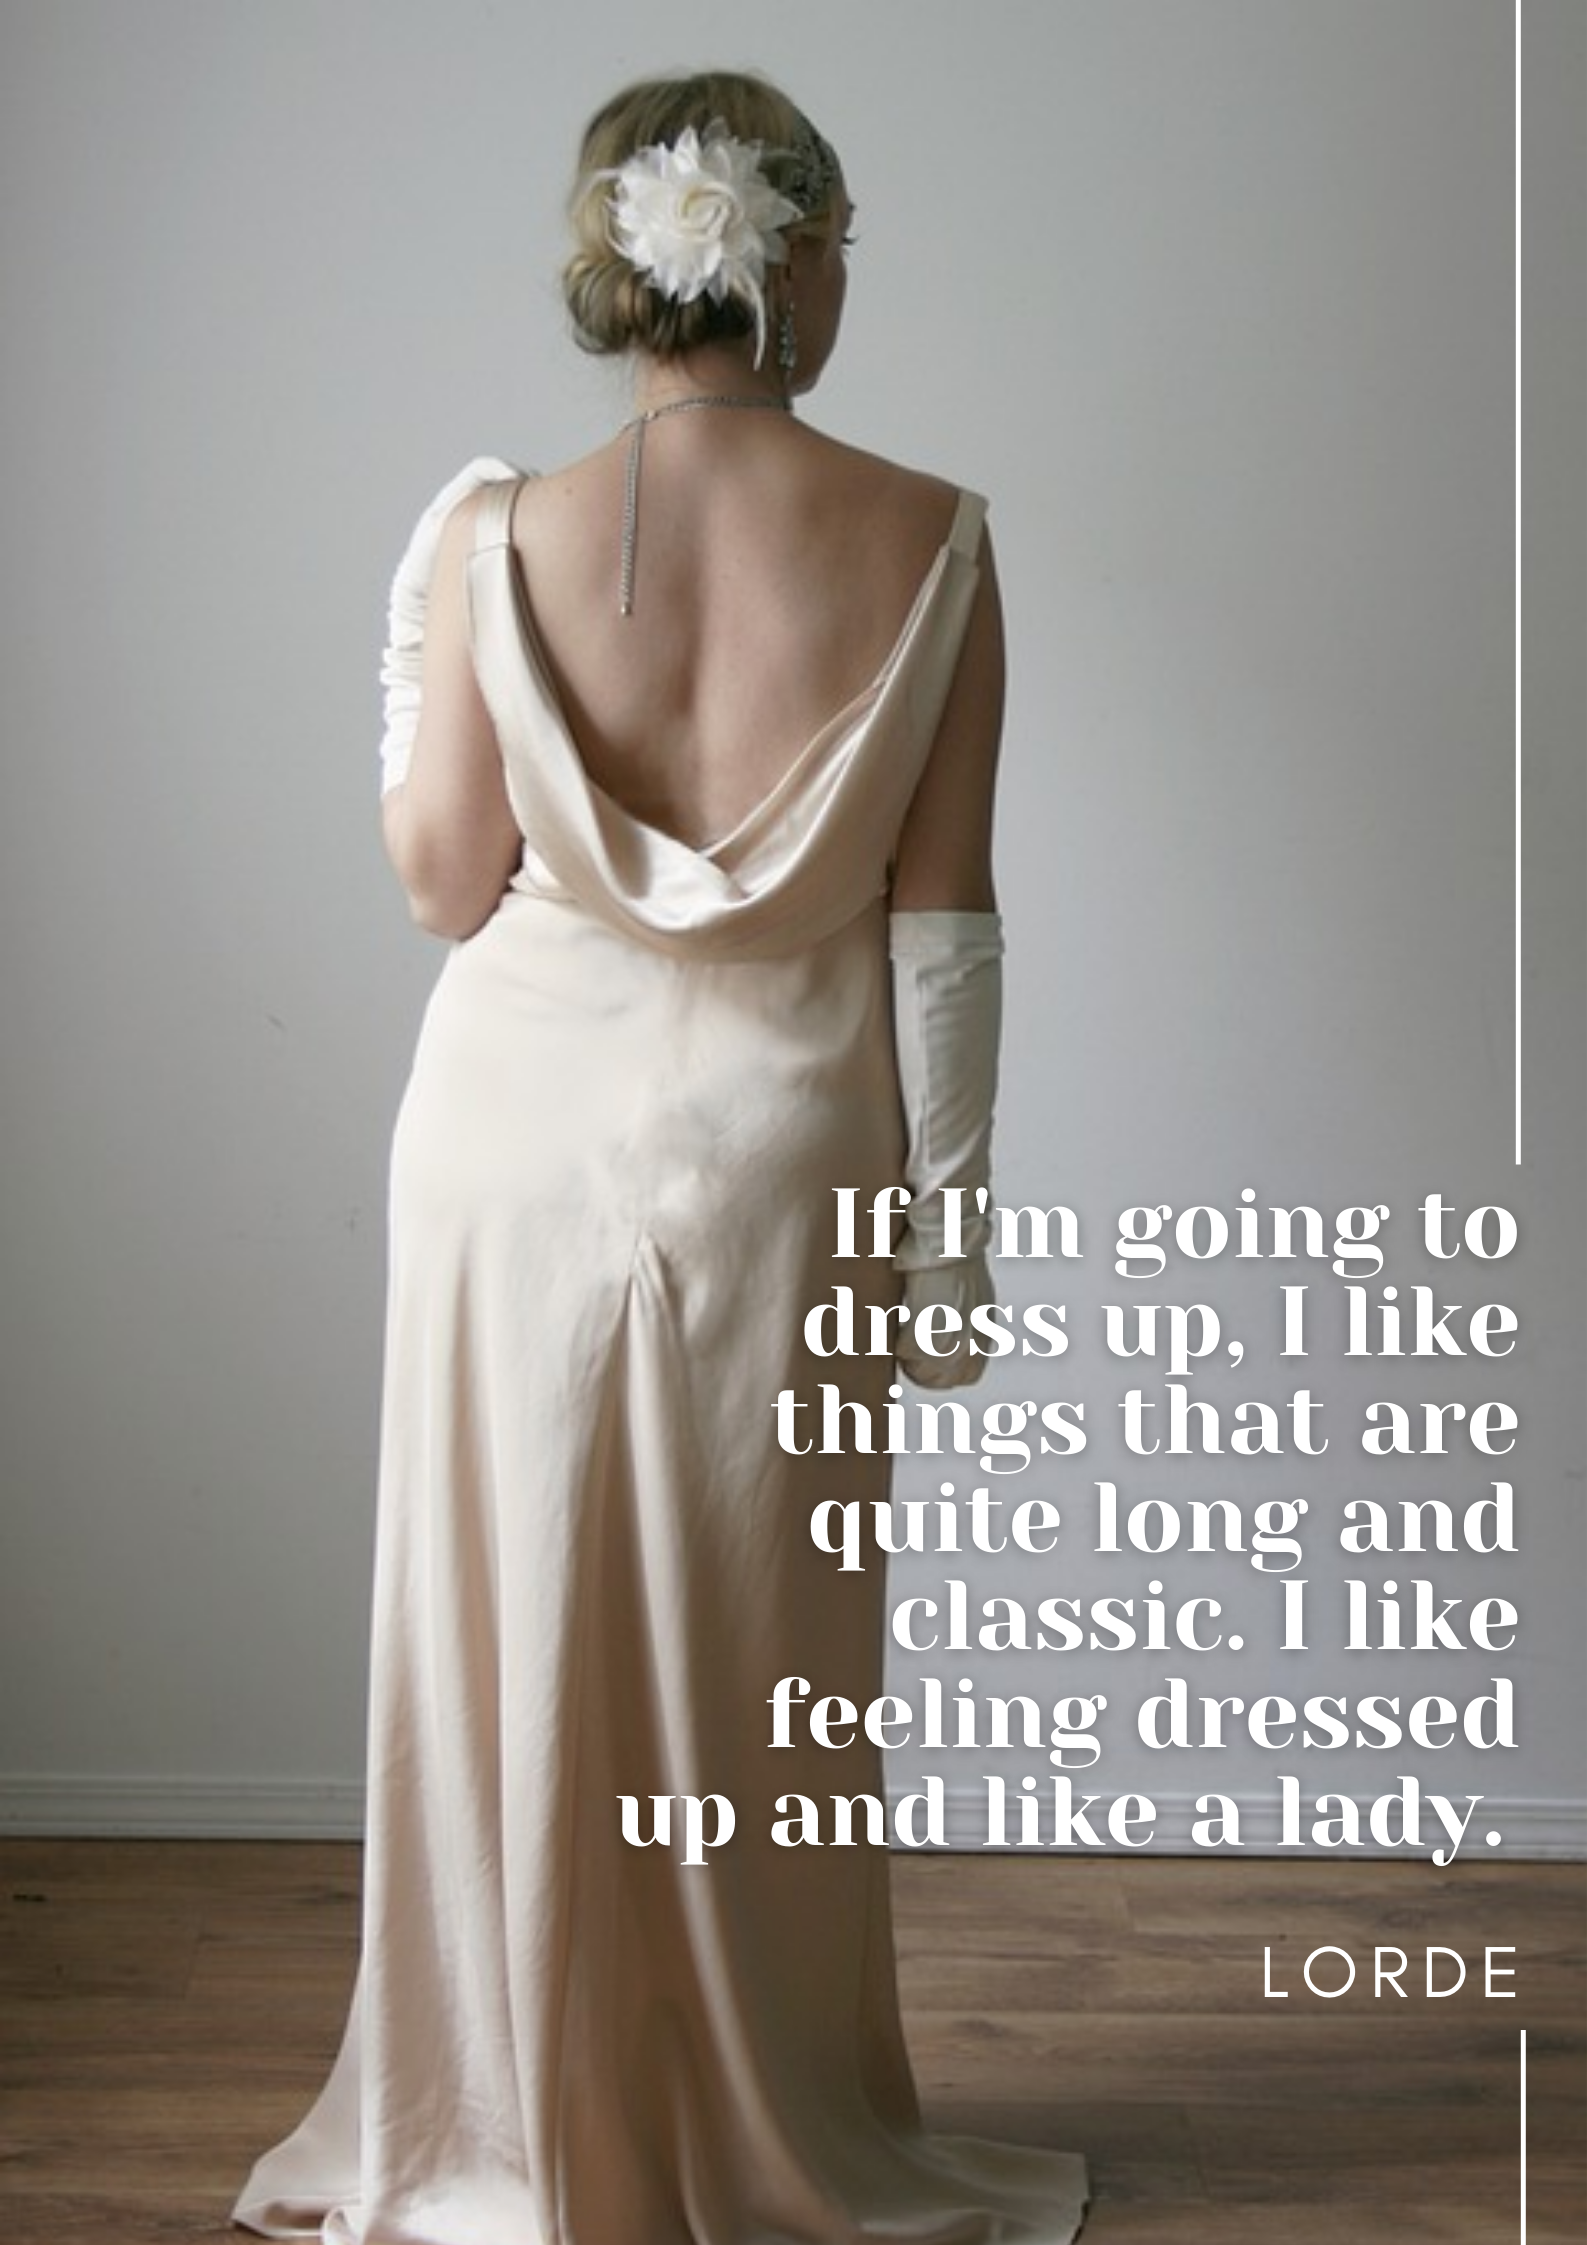 An image of a woman's back, turned away from the camera. She's wearing a vintage tyle wedding dress and elbow-length white gloves. Text over the image reads, "If I'm going to dress up, I like things that are quite long and classic. I like feeling dressed up and like a lady. – Lorde"